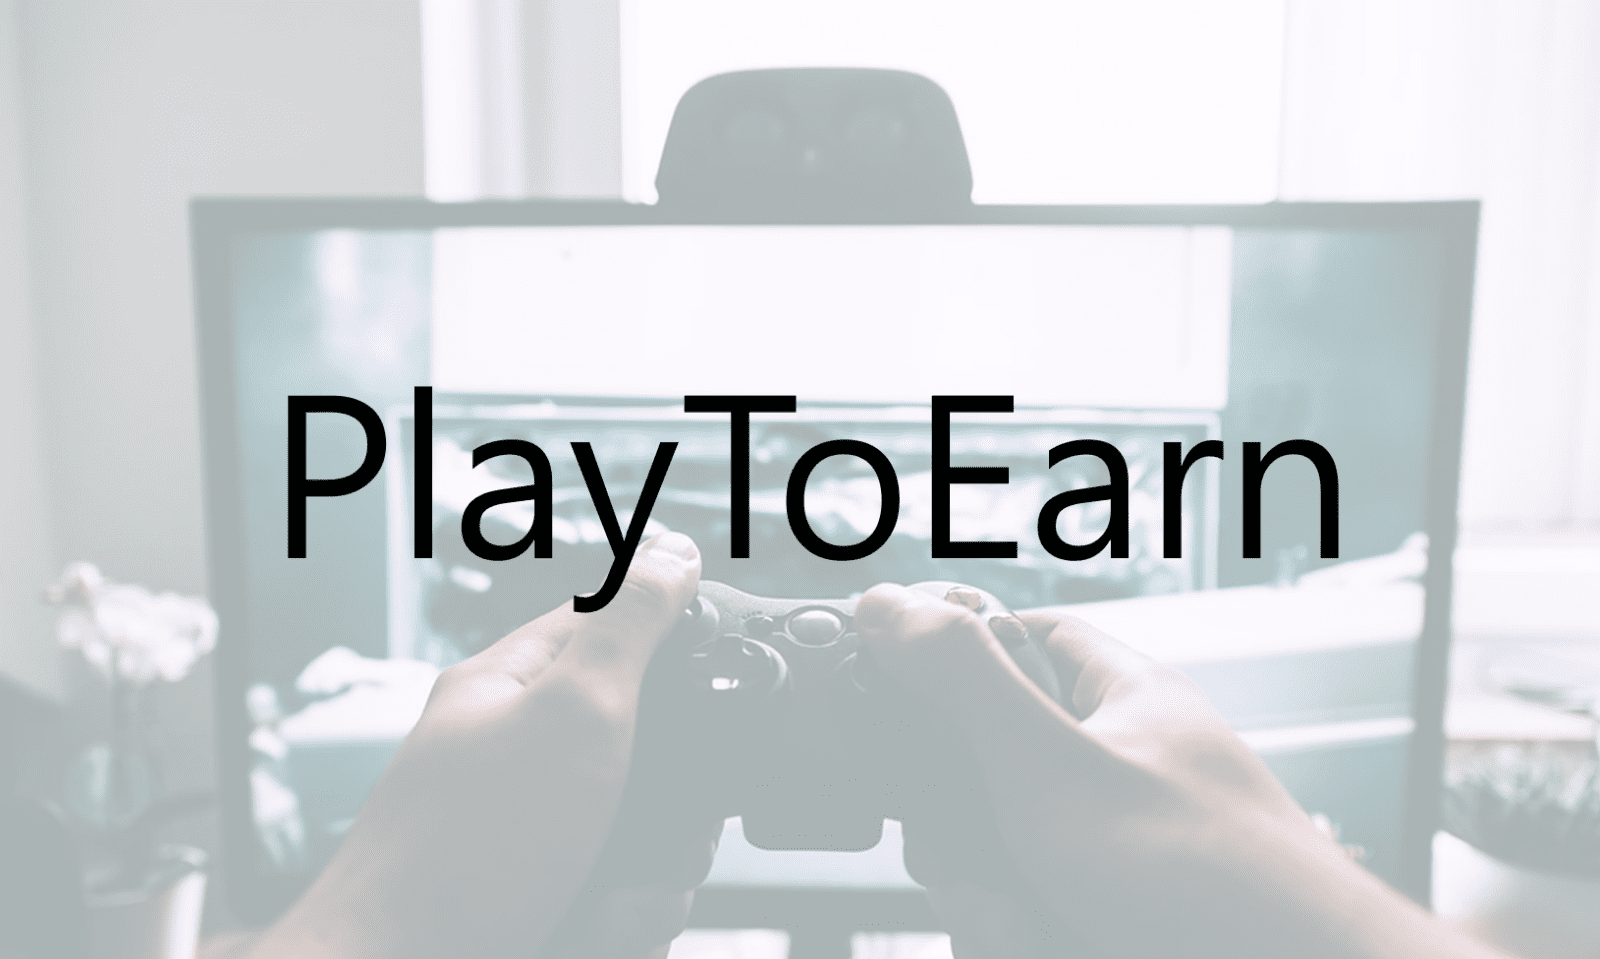 PlayToEarn or Play Games and Earn Money